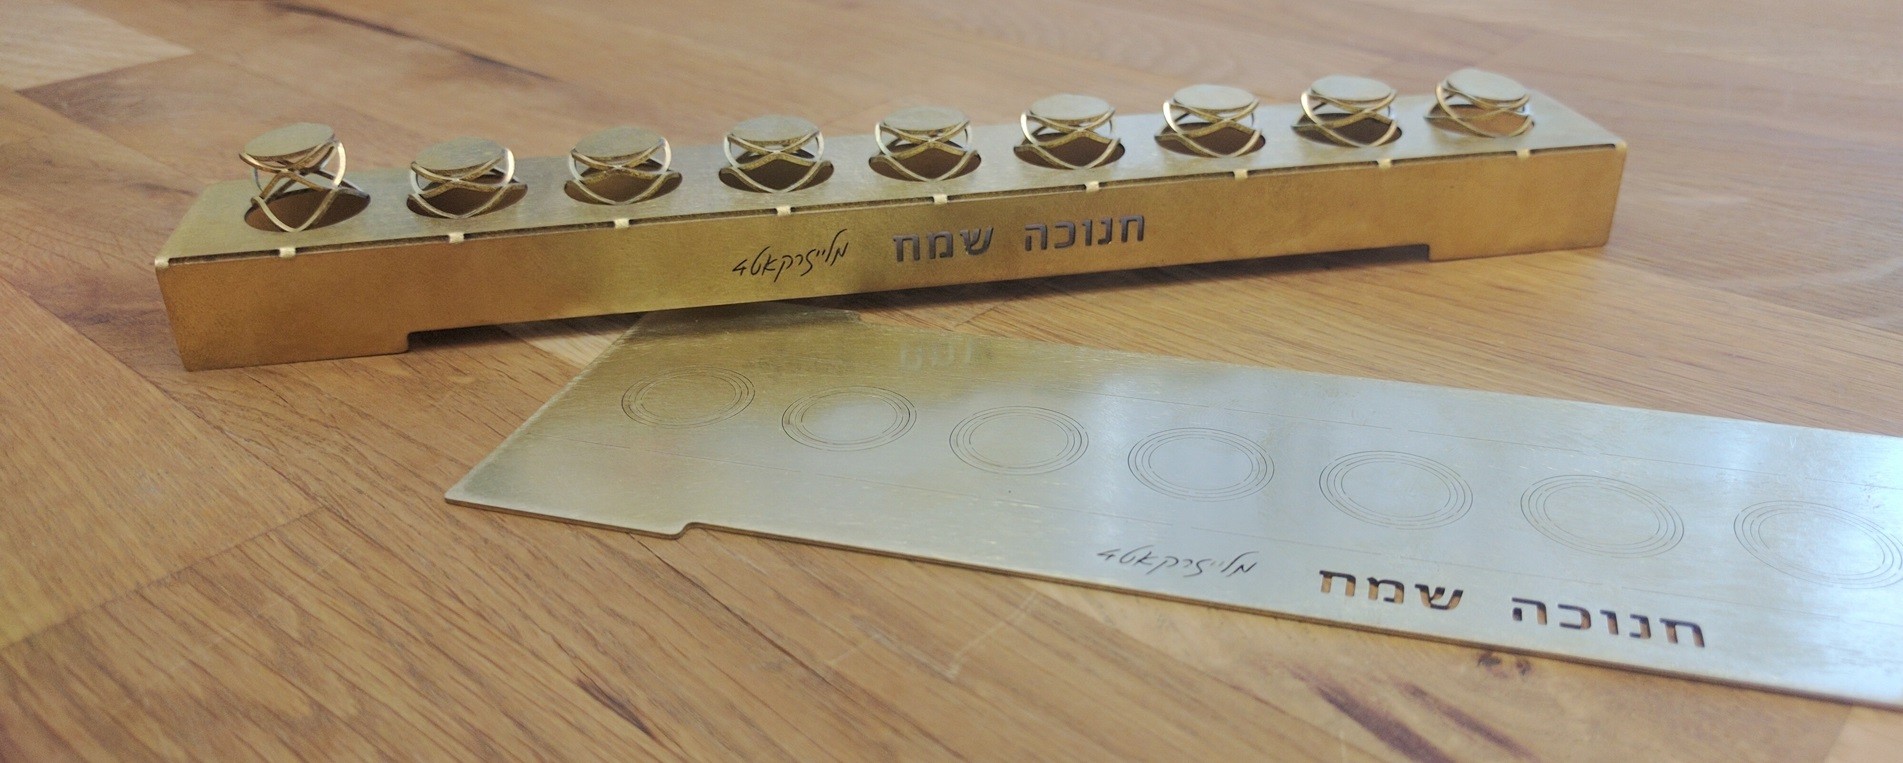 Happy Hanukkah from Lasercut4 - A Laser Menorah with laser cutting. Design and cutting: Lasercut 4 - laser cutting solutions